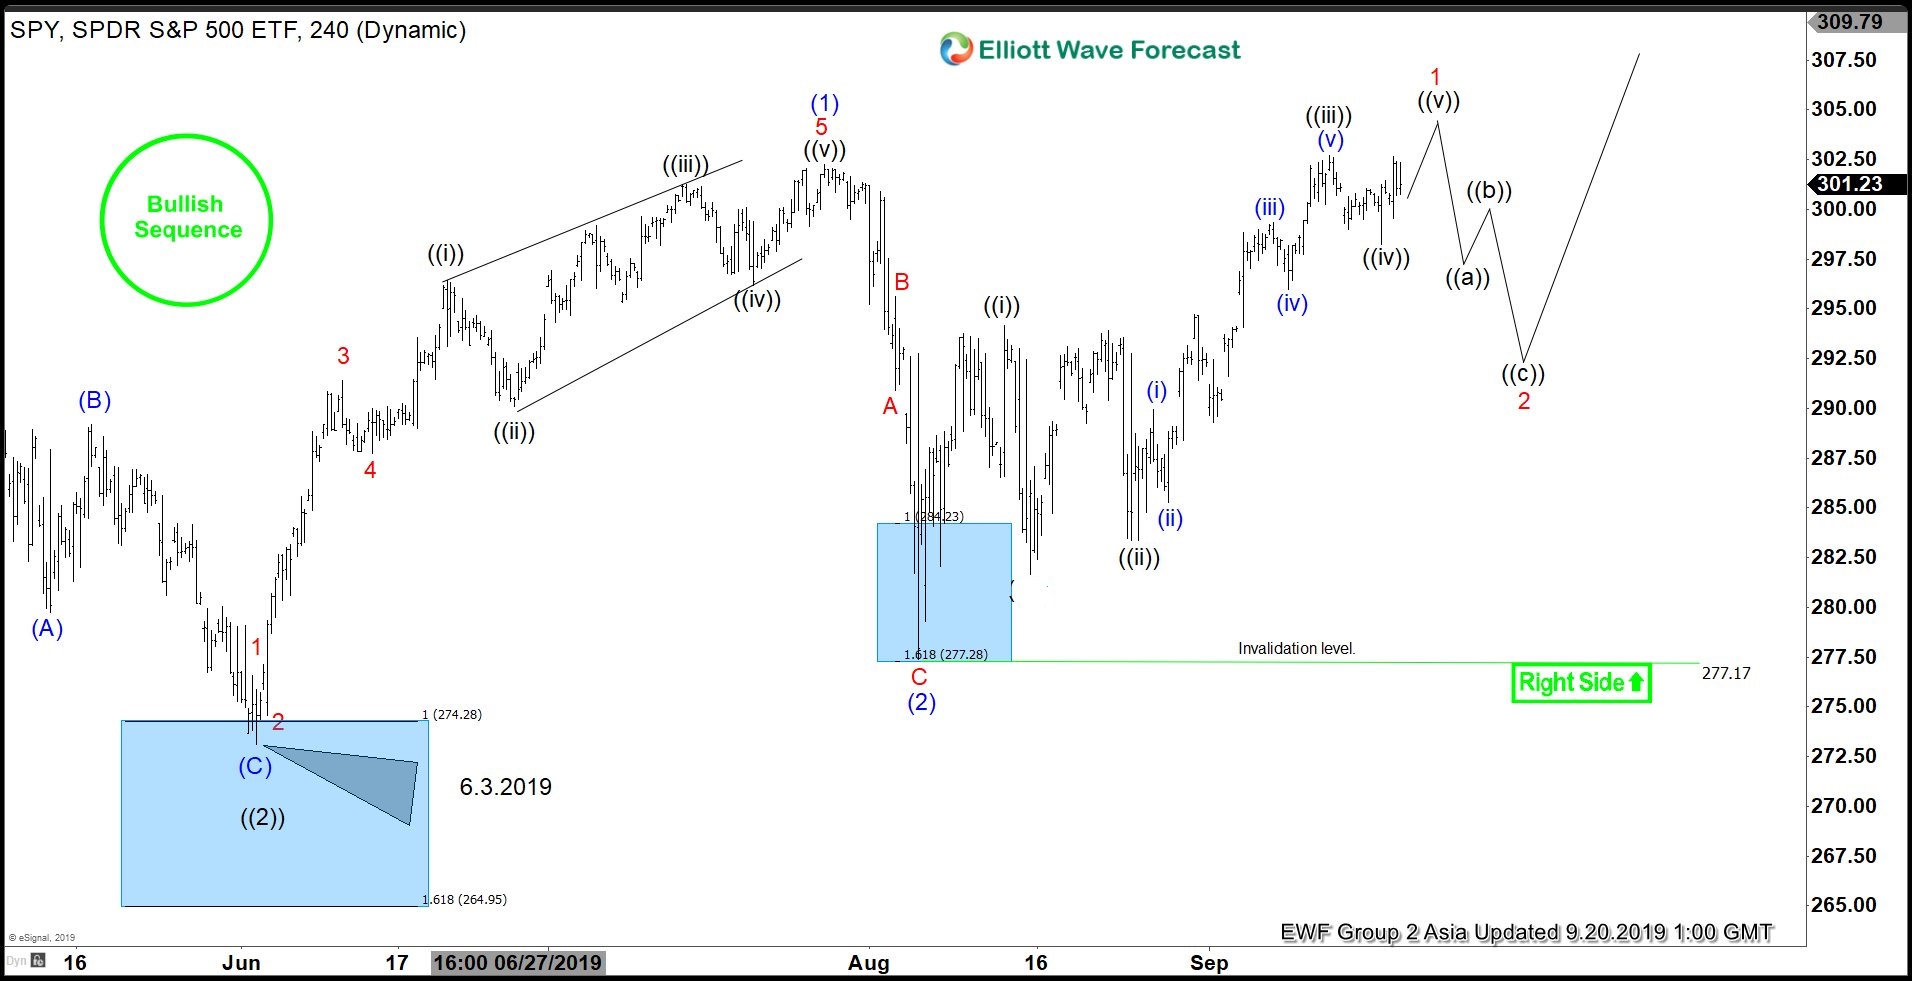 Elliott Wave View: SPY Can See Further Strength in Short Term